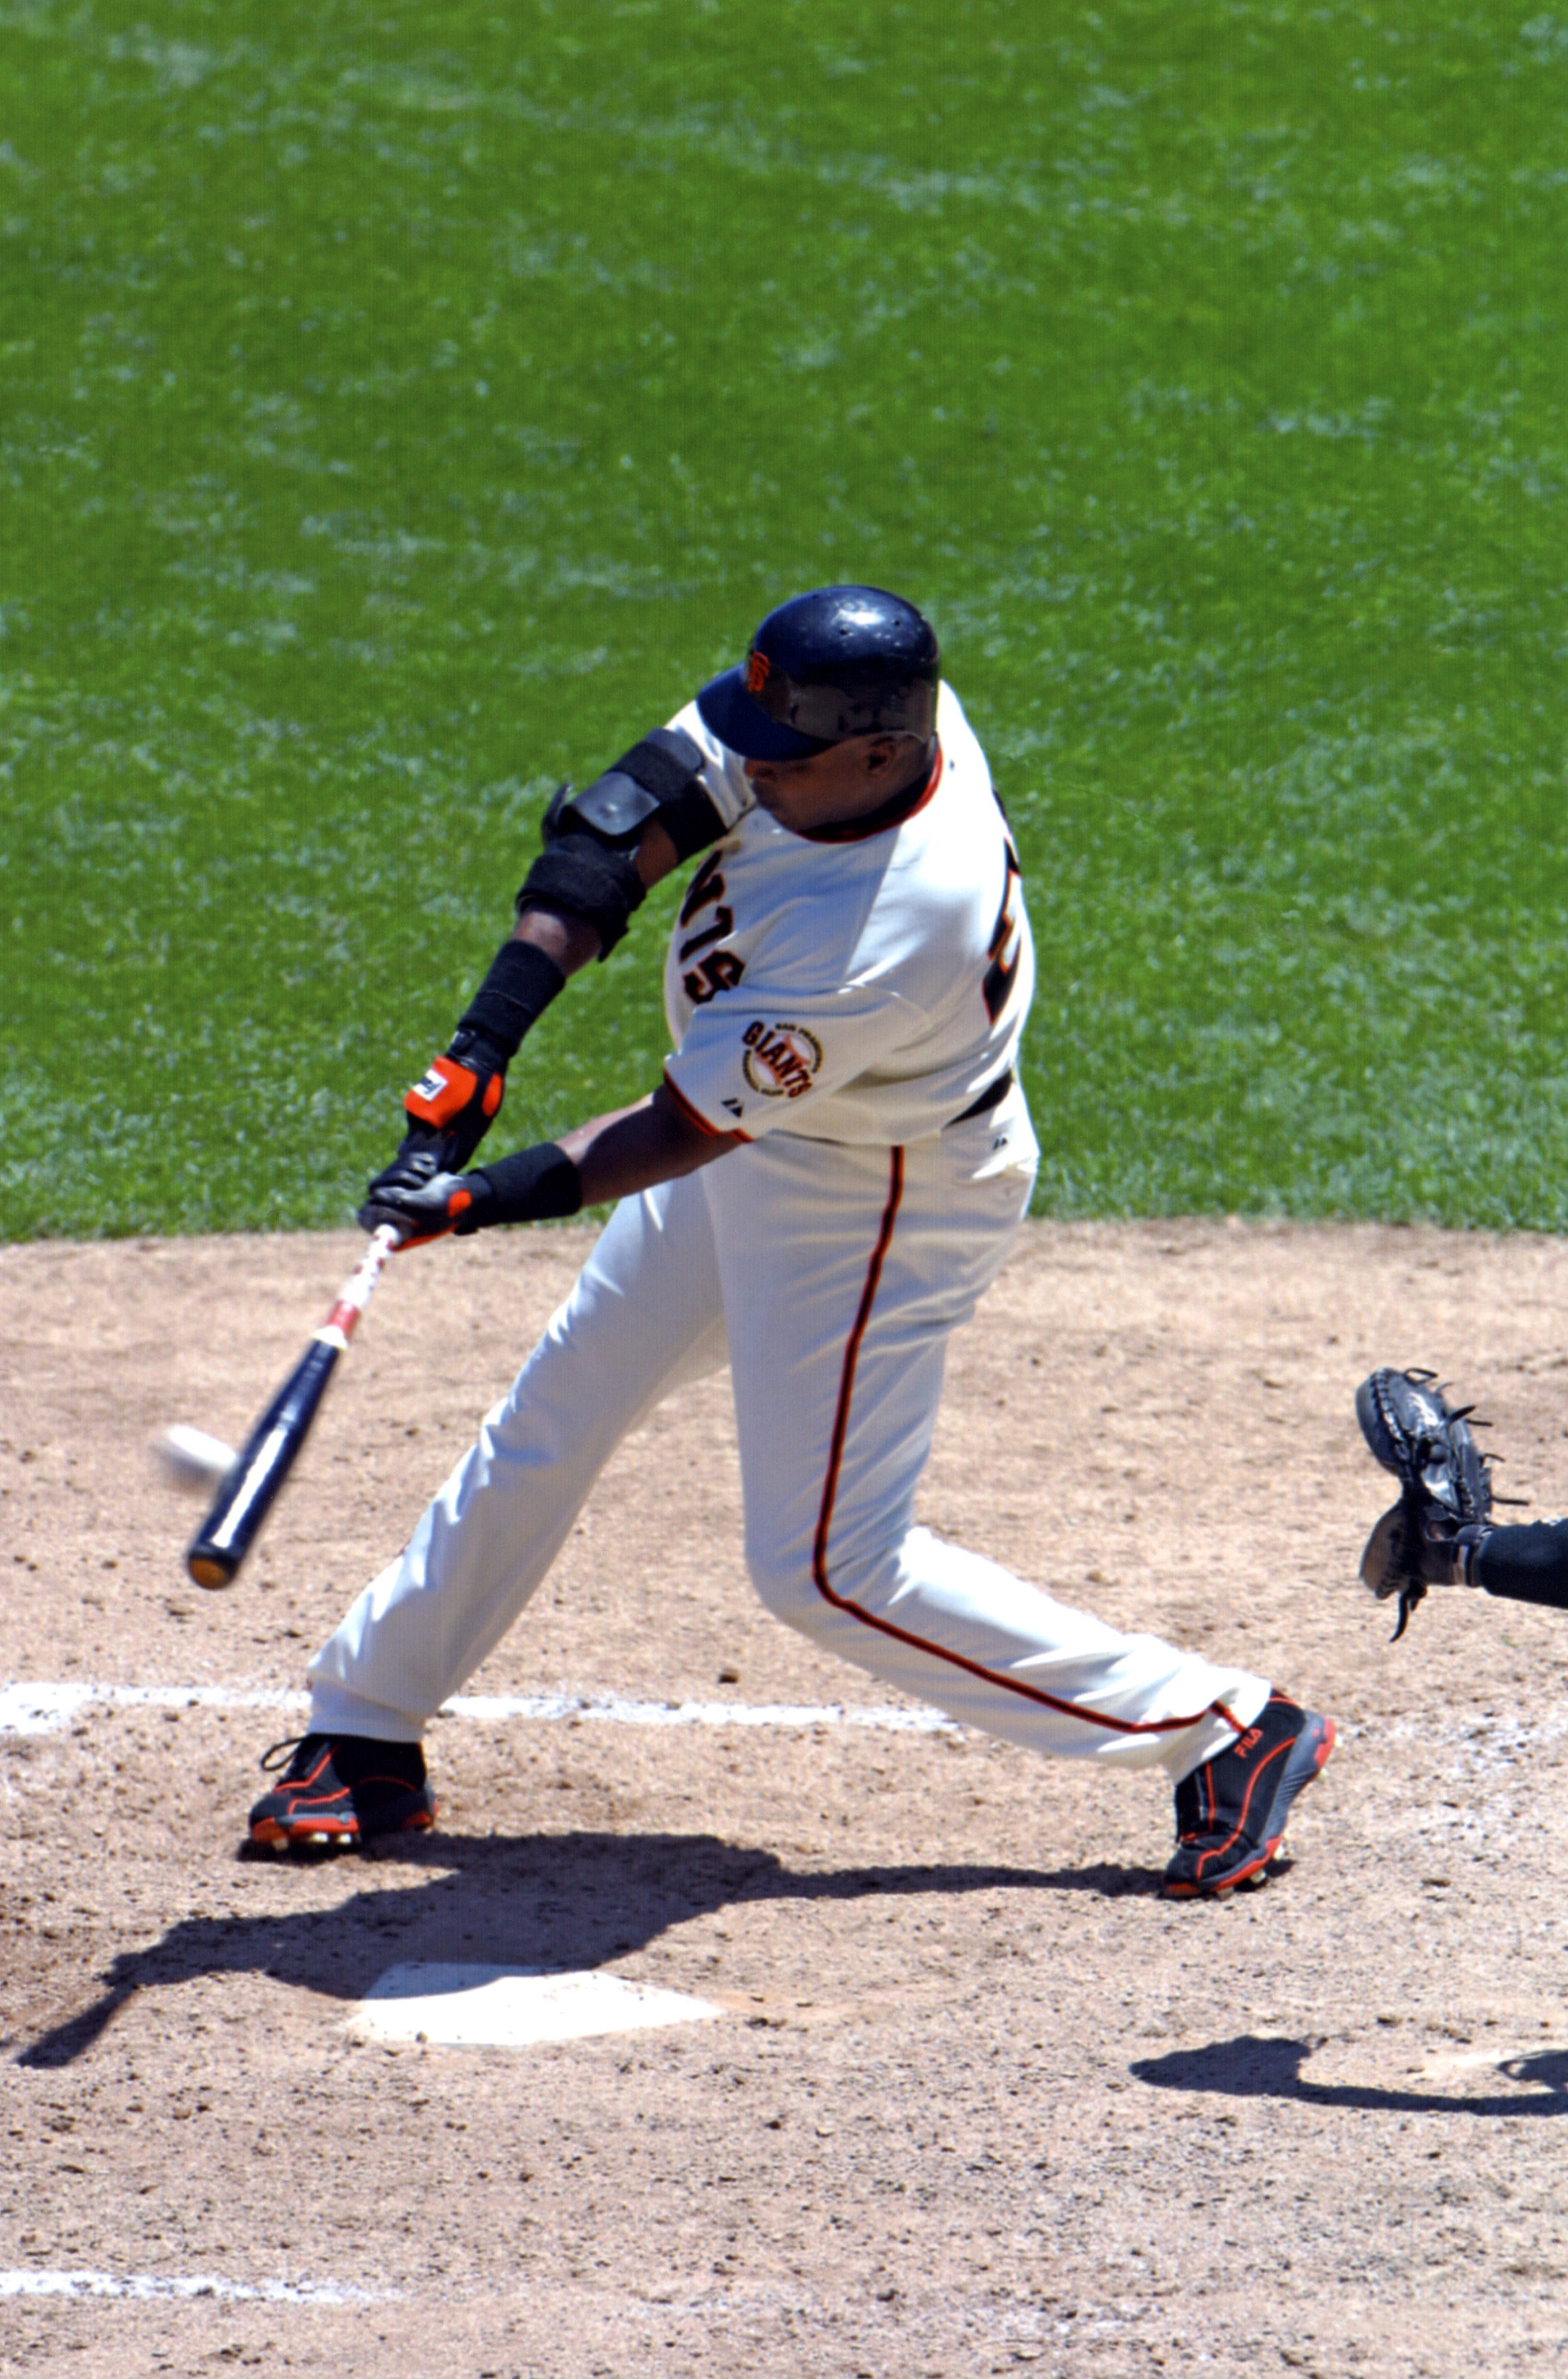 Hall of fame Photograph. Barry Bonds #715 to surpass historical legend Babe Ruth during the Bonds' chase. I was the only photographer to capture bat on ball. Go to www.reel-rescue.com to view Kris' entire photography portfolio.